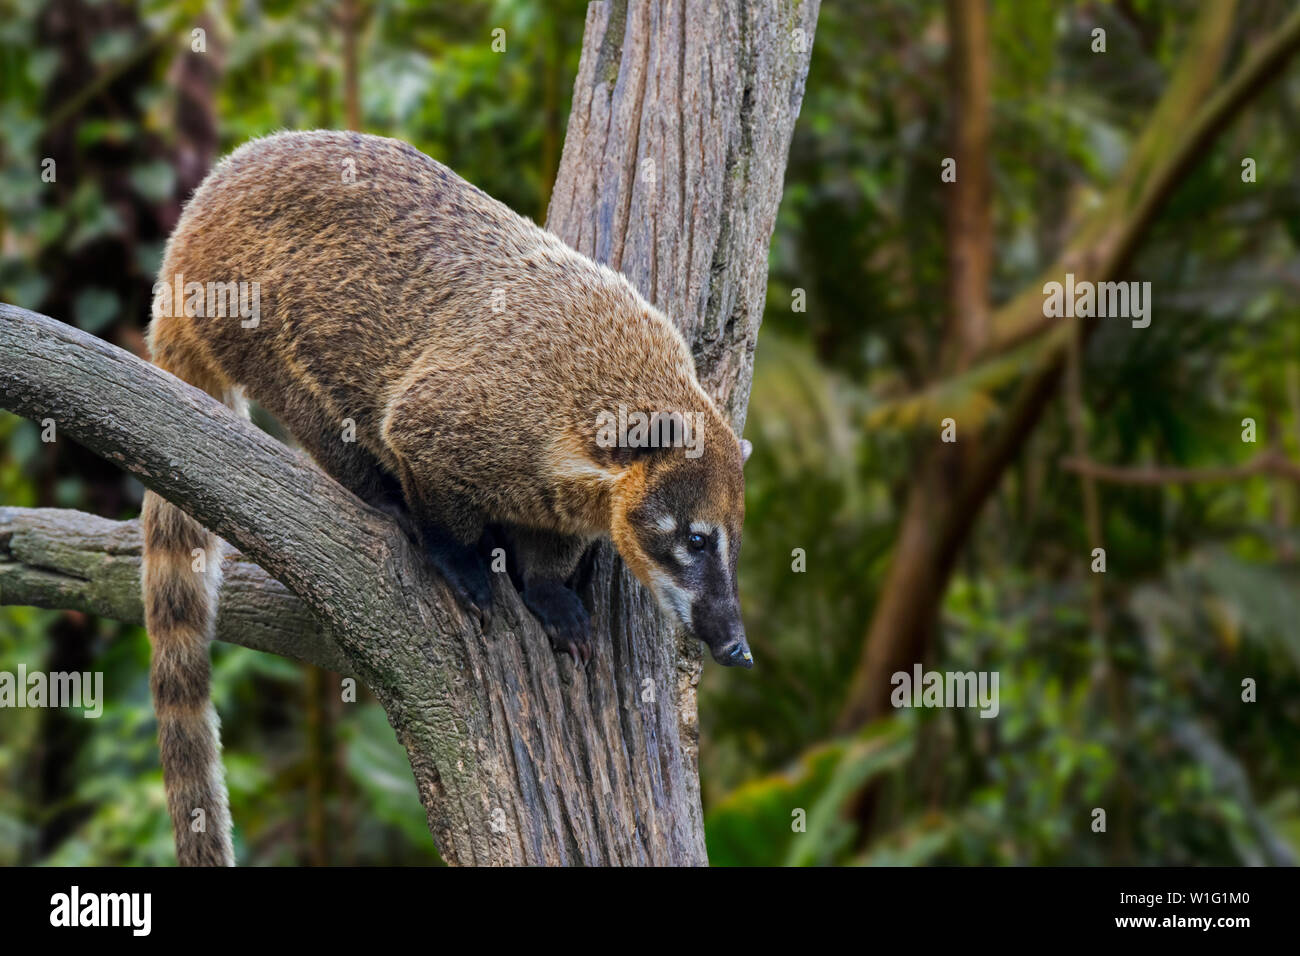 South American coati / ring-tailed coati (Nasua nasua) looking down from tree, native to forests of tropical and subtropical South America Stock Photo